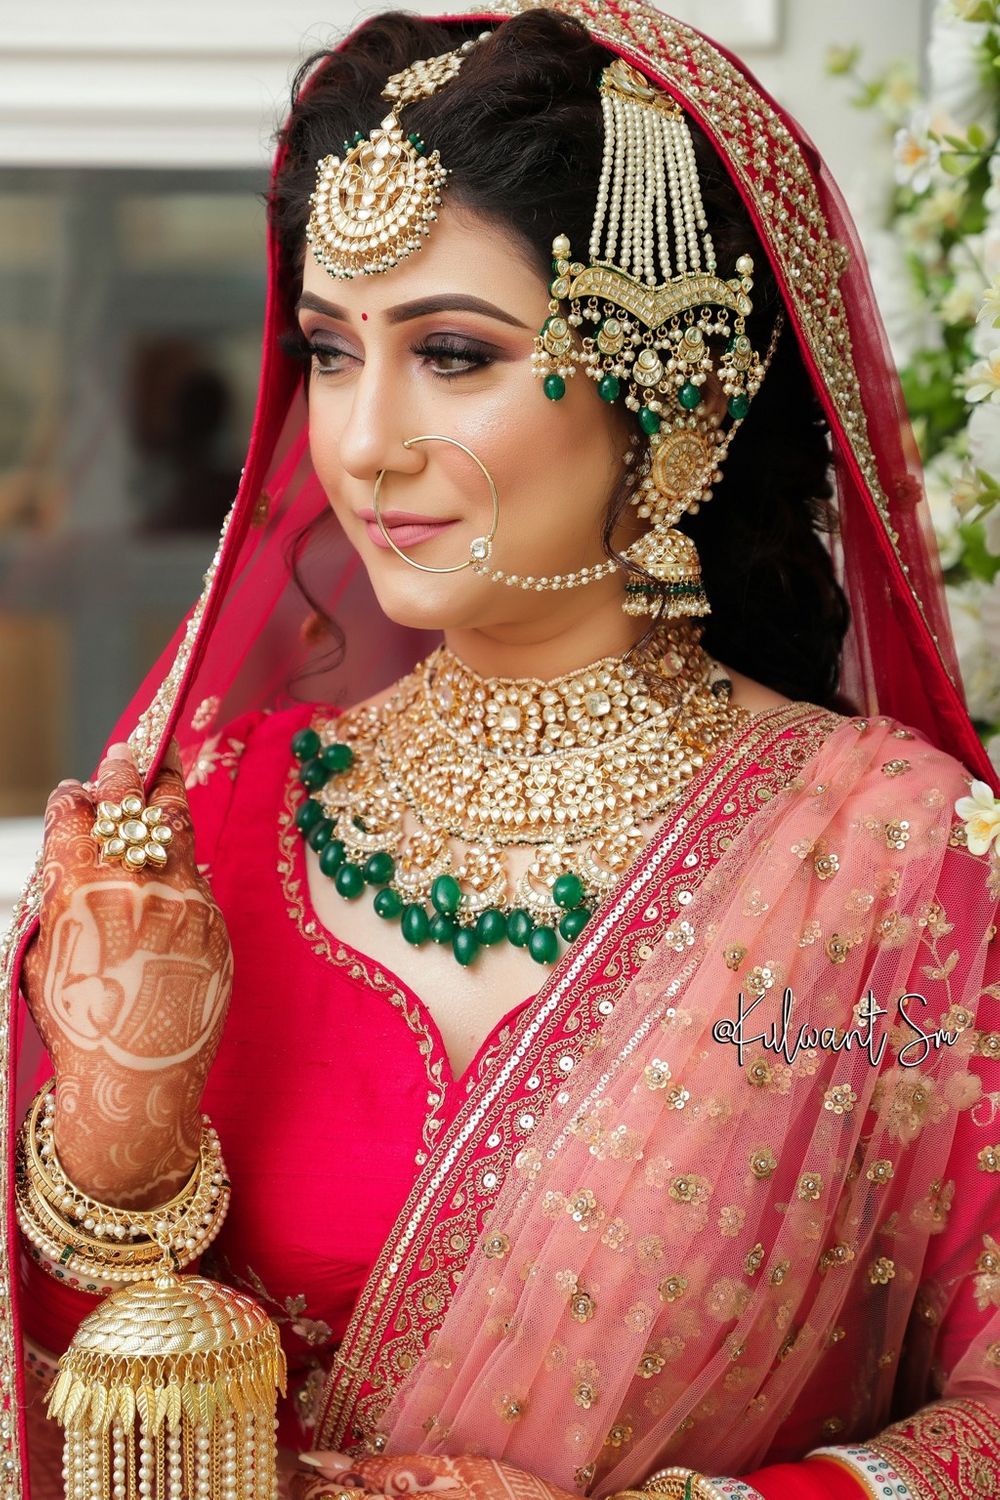 Photo From Bride4 - By Kulwant Singh Mararr